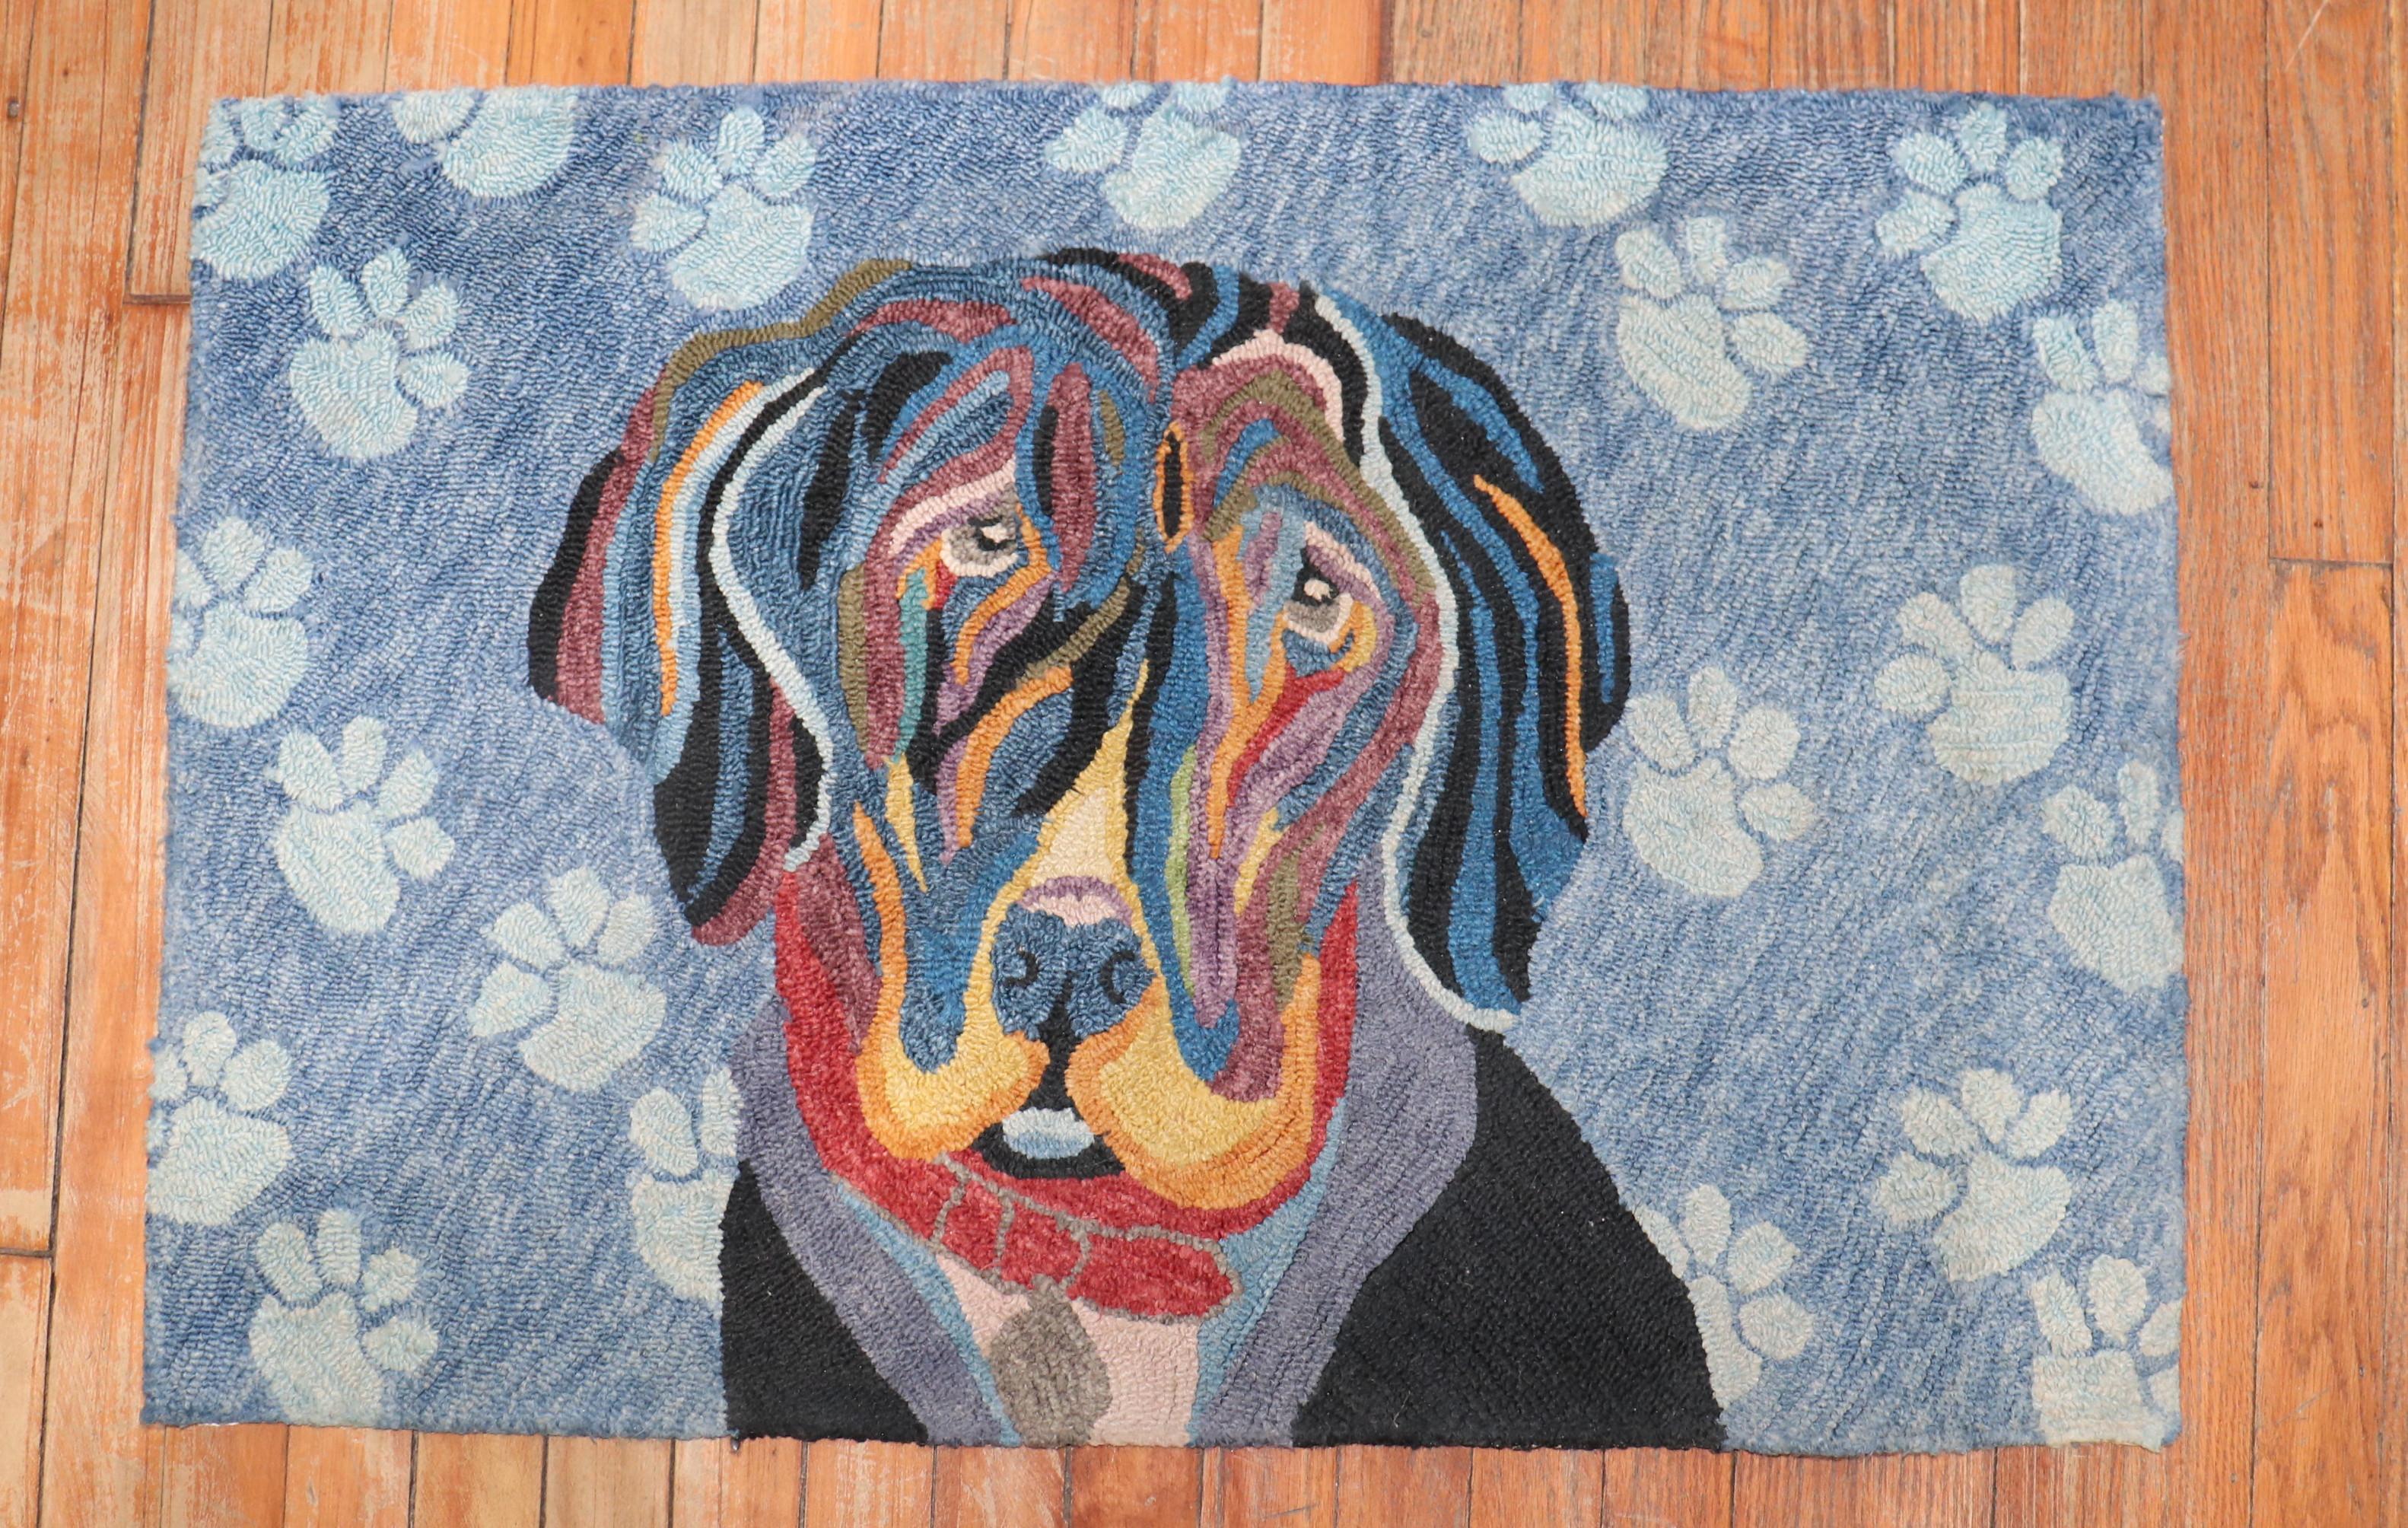 Late 20th century hand-loomed American hooked rug depicting an innocent dog.

Measures: 2' x 2'11''.